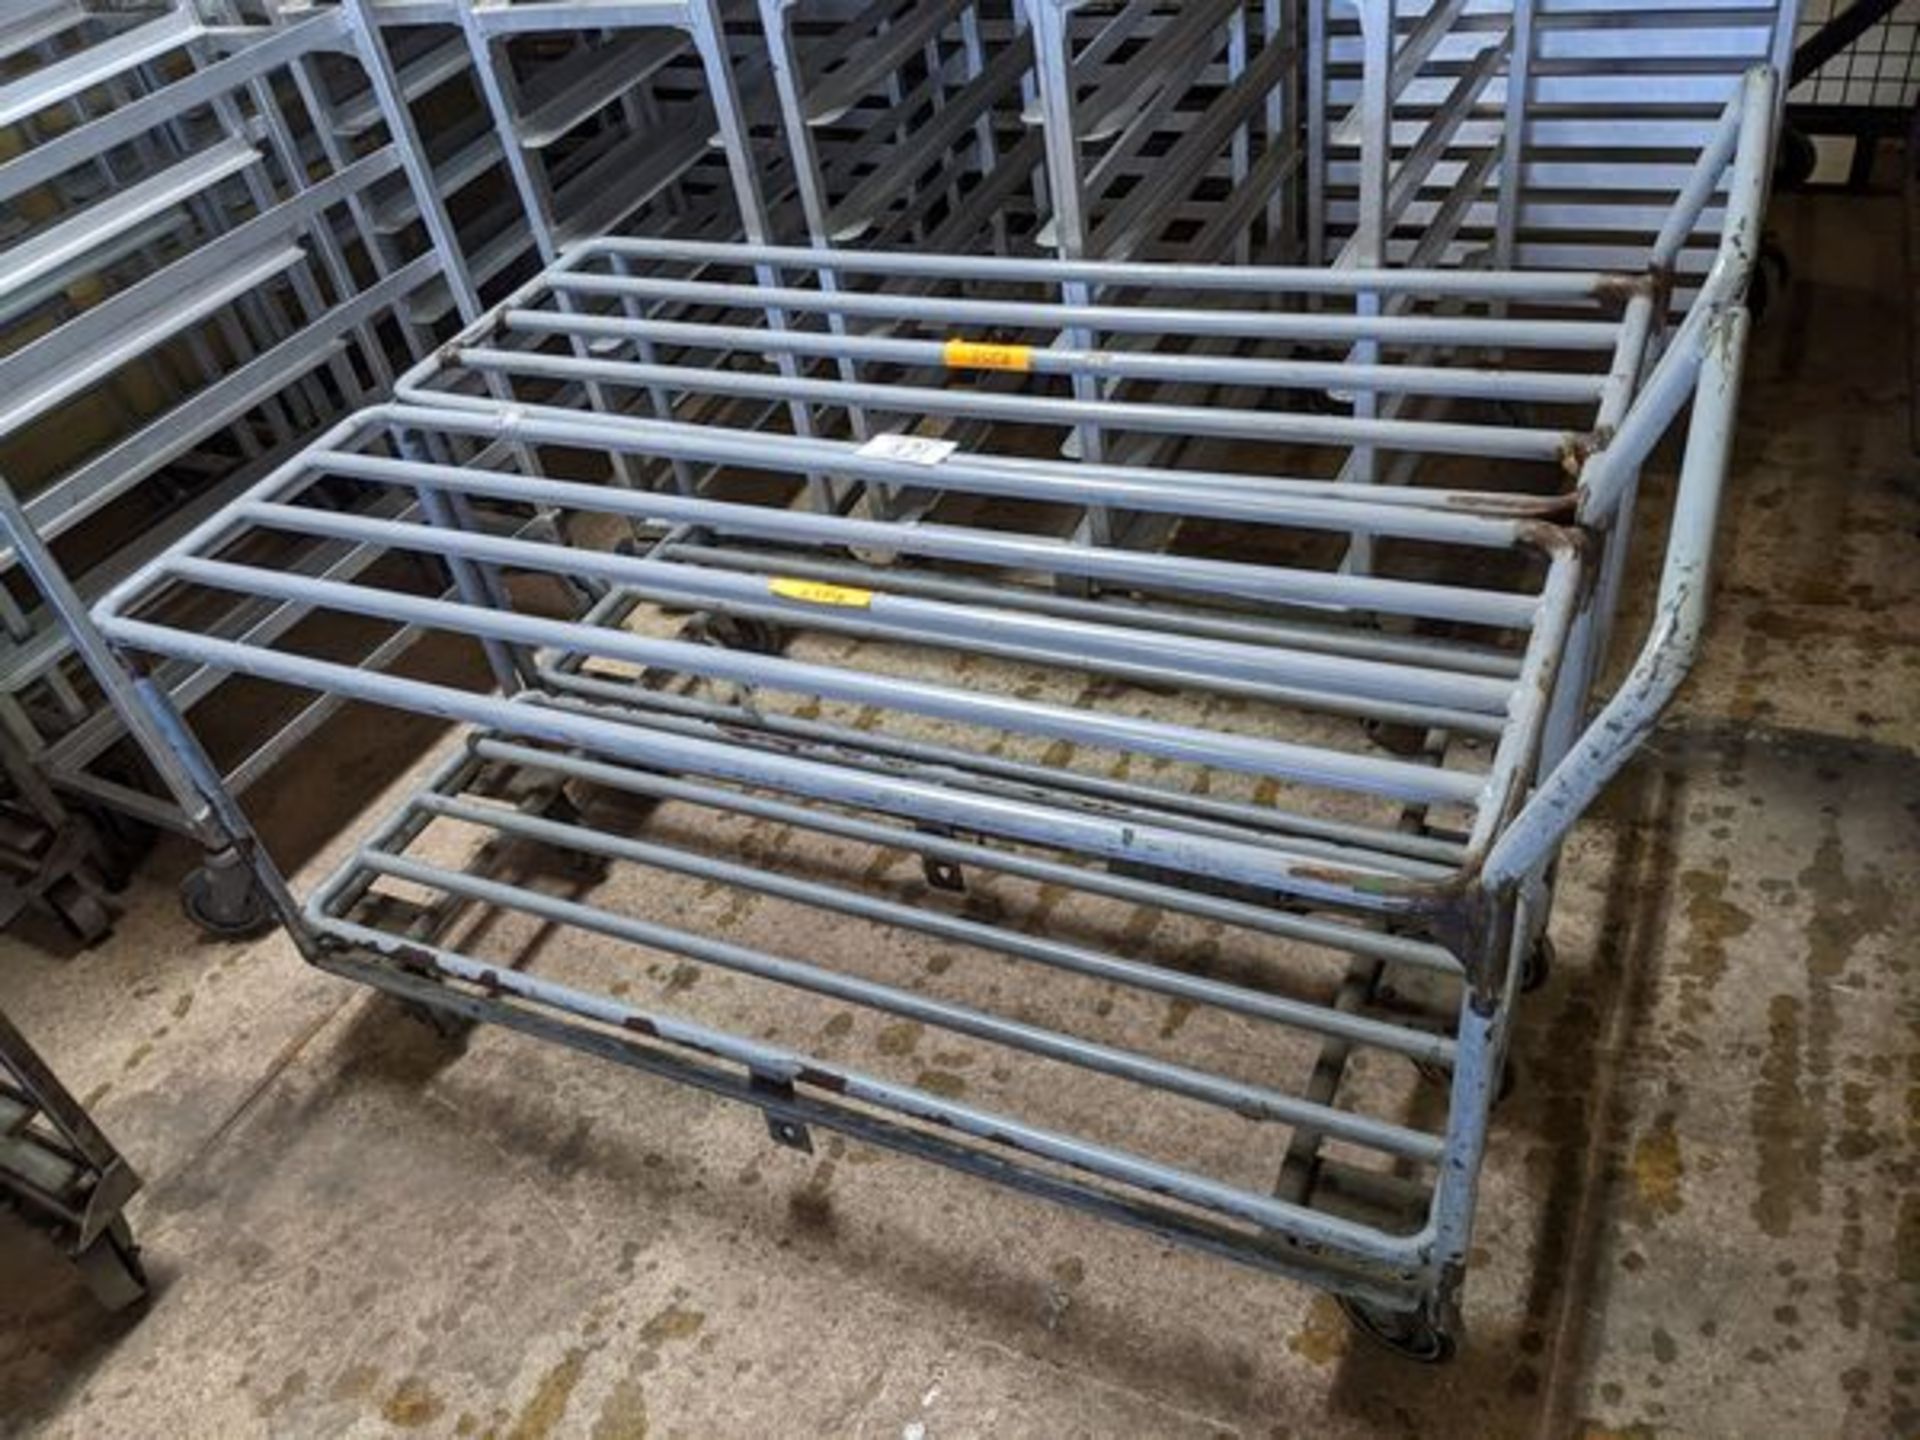 Two 54" Two Tier Stock Carts